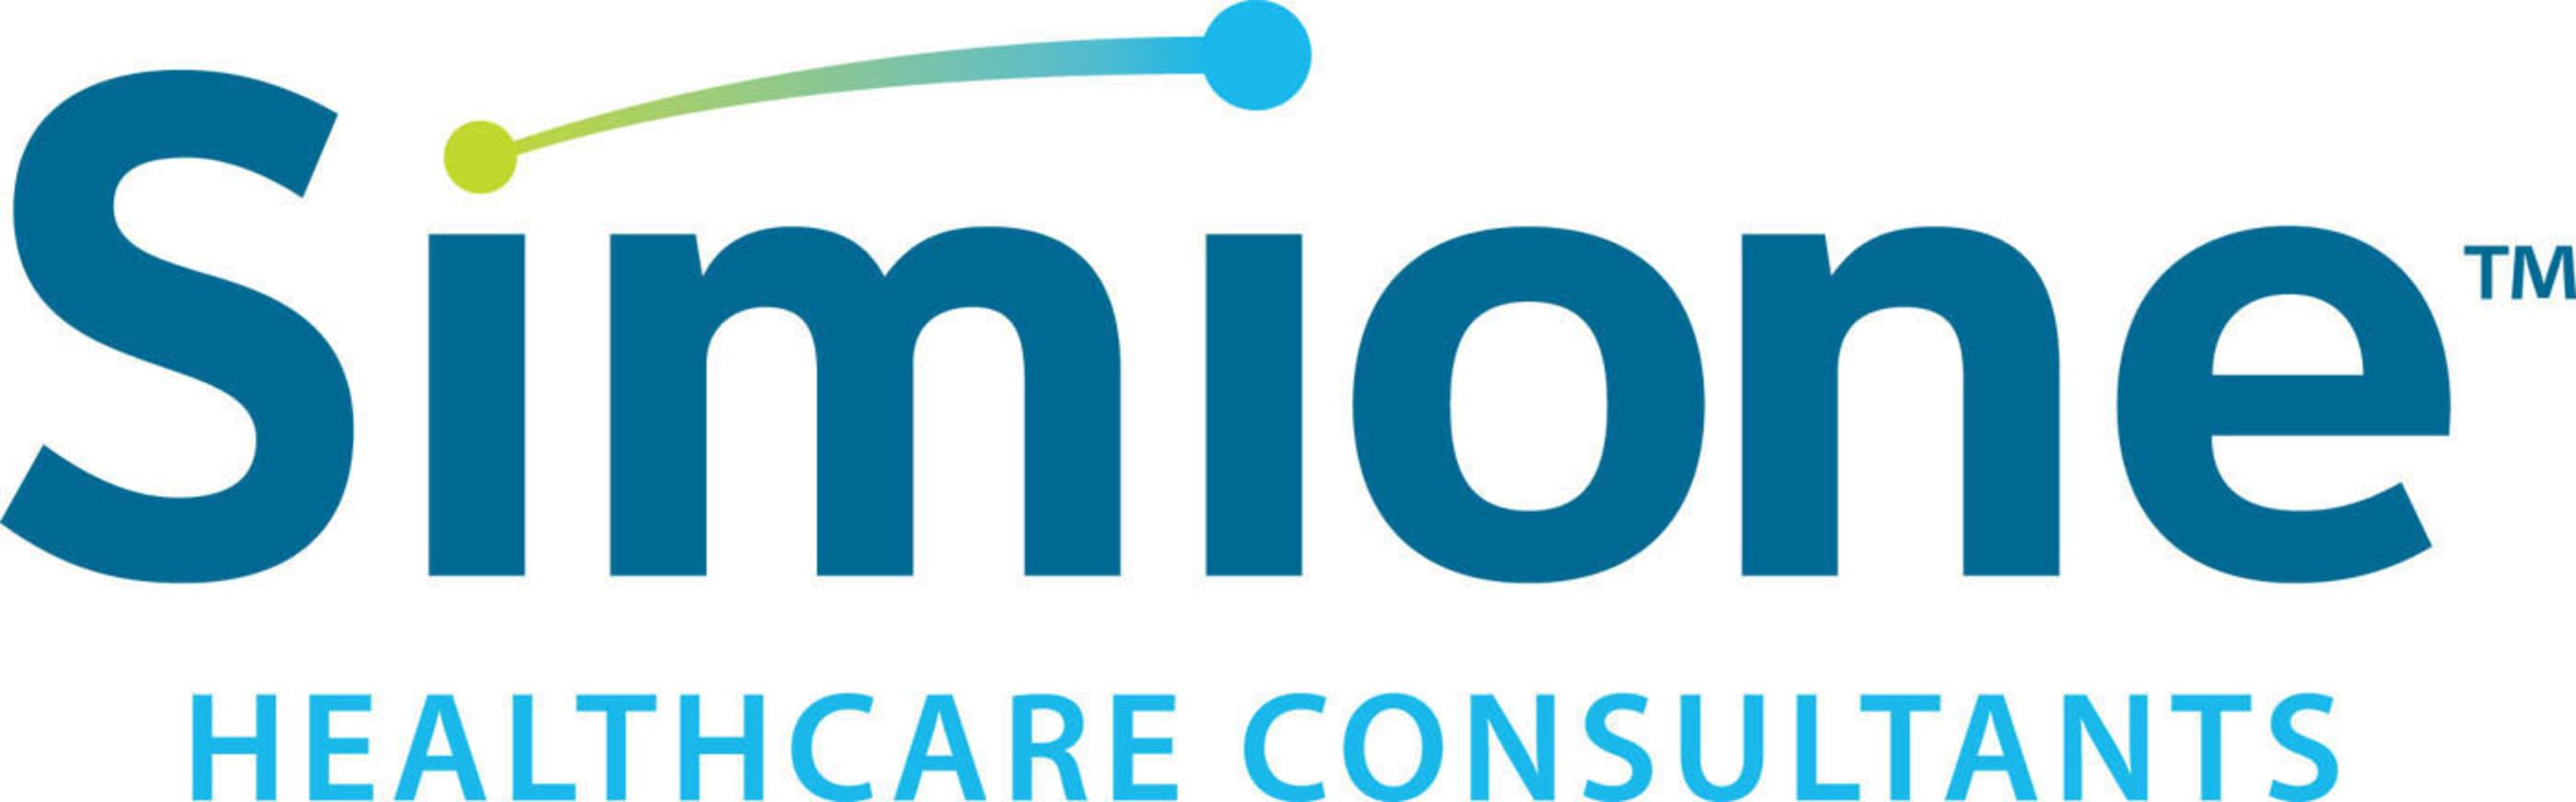 Simione Healthcare Consultants Provides Healthy Business Solutions for Home Care and Hospice. (PRNewsFoto/Simione Healthcare Consultants) (PRNewsFoto/SIMIONE HEALTHCARE CONSULTANTS) (PRNewsFoto/SIMIONE HEALTHCARE CONSULTANTS)